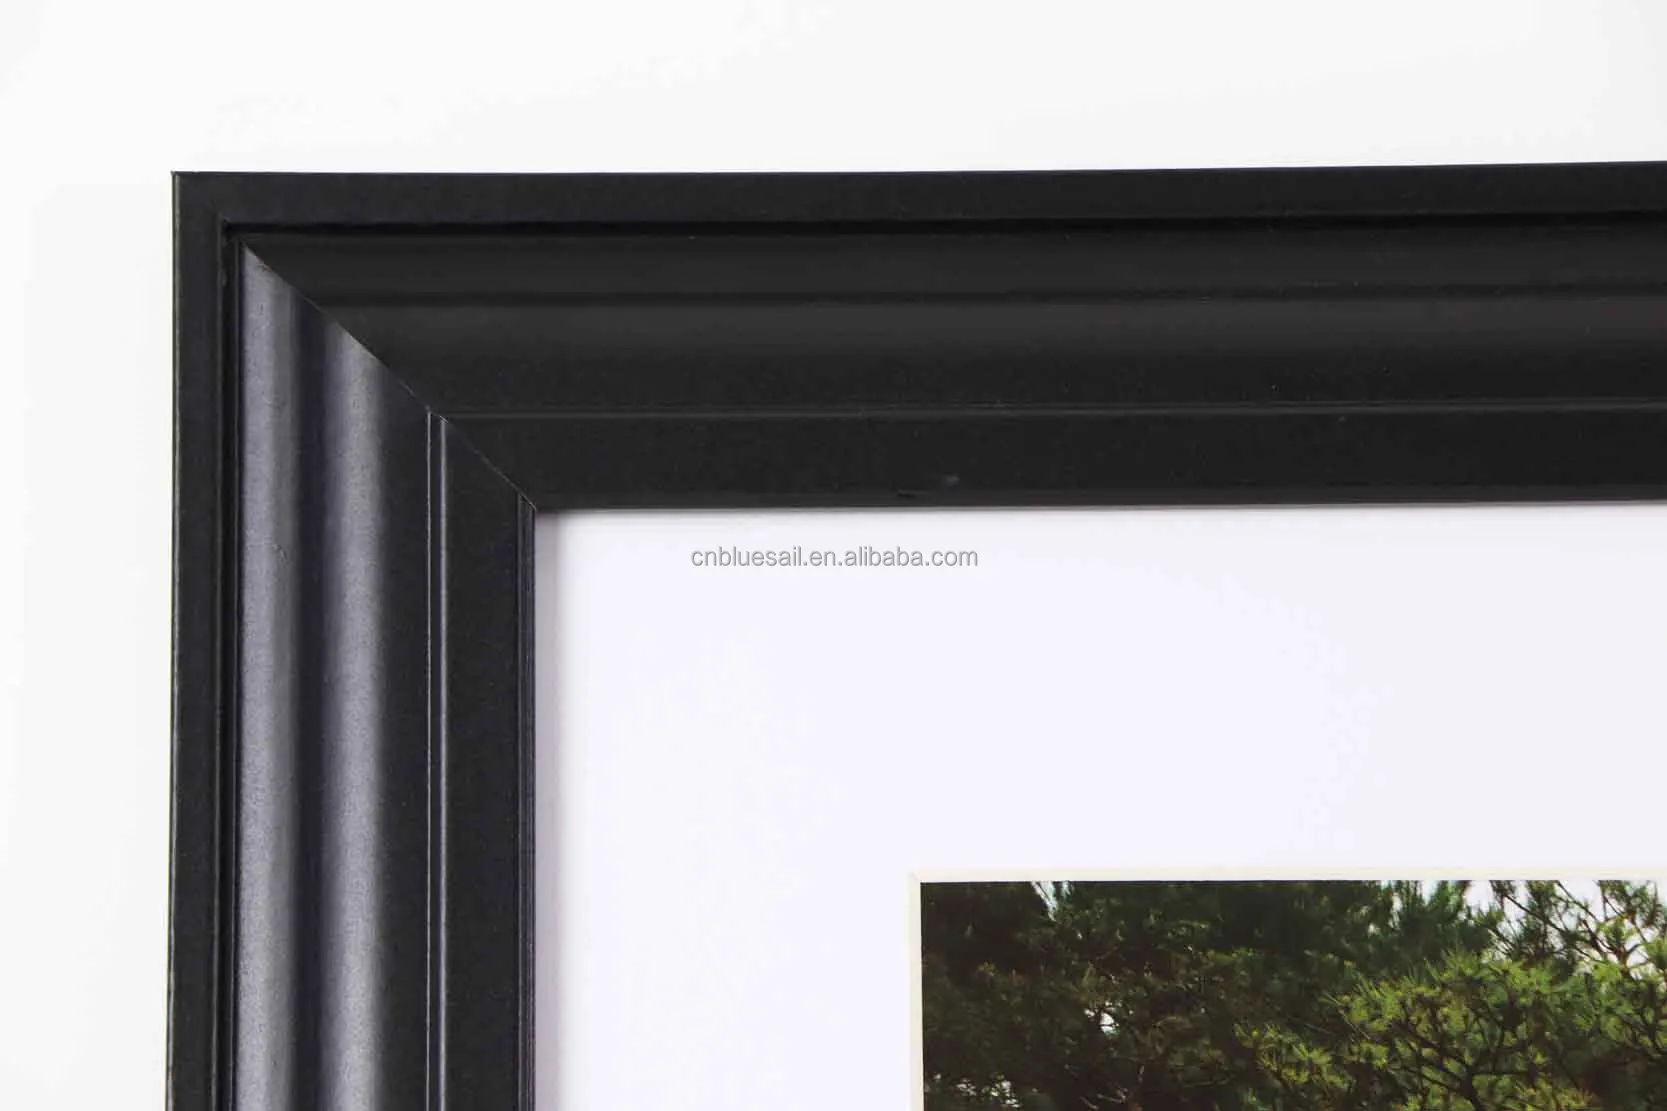 20x20 Frame with Mat - Black 22X22 Frame Wood Made to Display Print or Poster Measuring 20 x 20 Inches with White Photo Mat